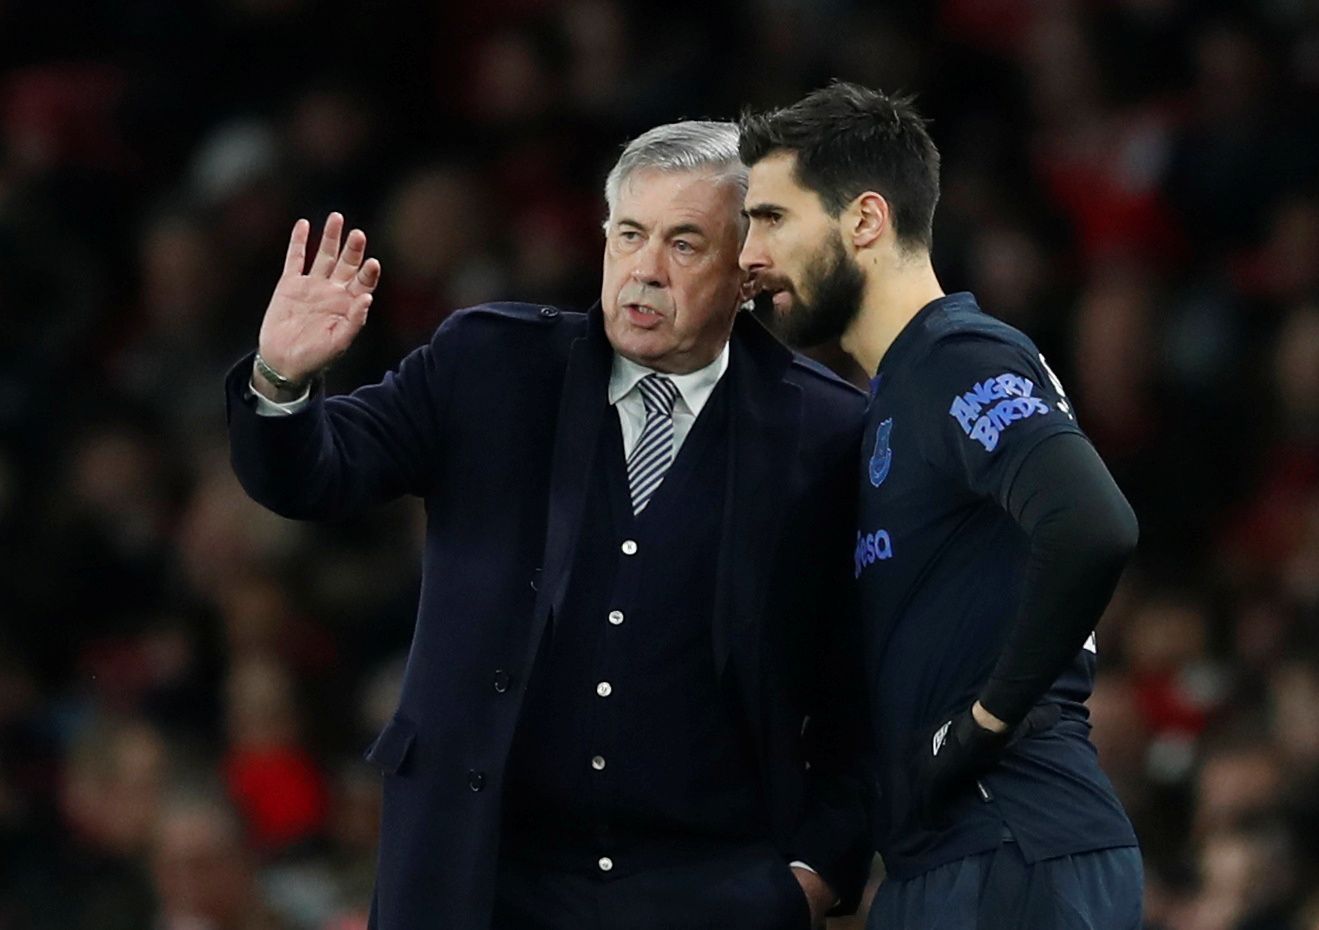 Soccer Football - Premier League - Arsenal v Everton - Emirates Stadium, London, Britain - February 23, 2020  Everton's Andre Gomes receives instructions from manager Carlo Ancelotti before being substituted on REUTERS/David Klein  EDITORIAL USE ONLY. No use with unauthorized audio, video, data, fixture lists, club/league logos or "live" services. Online in-match use limited to 75 images, no video emulation. No use in betting, games or single club/league/player publications.  Please contact your